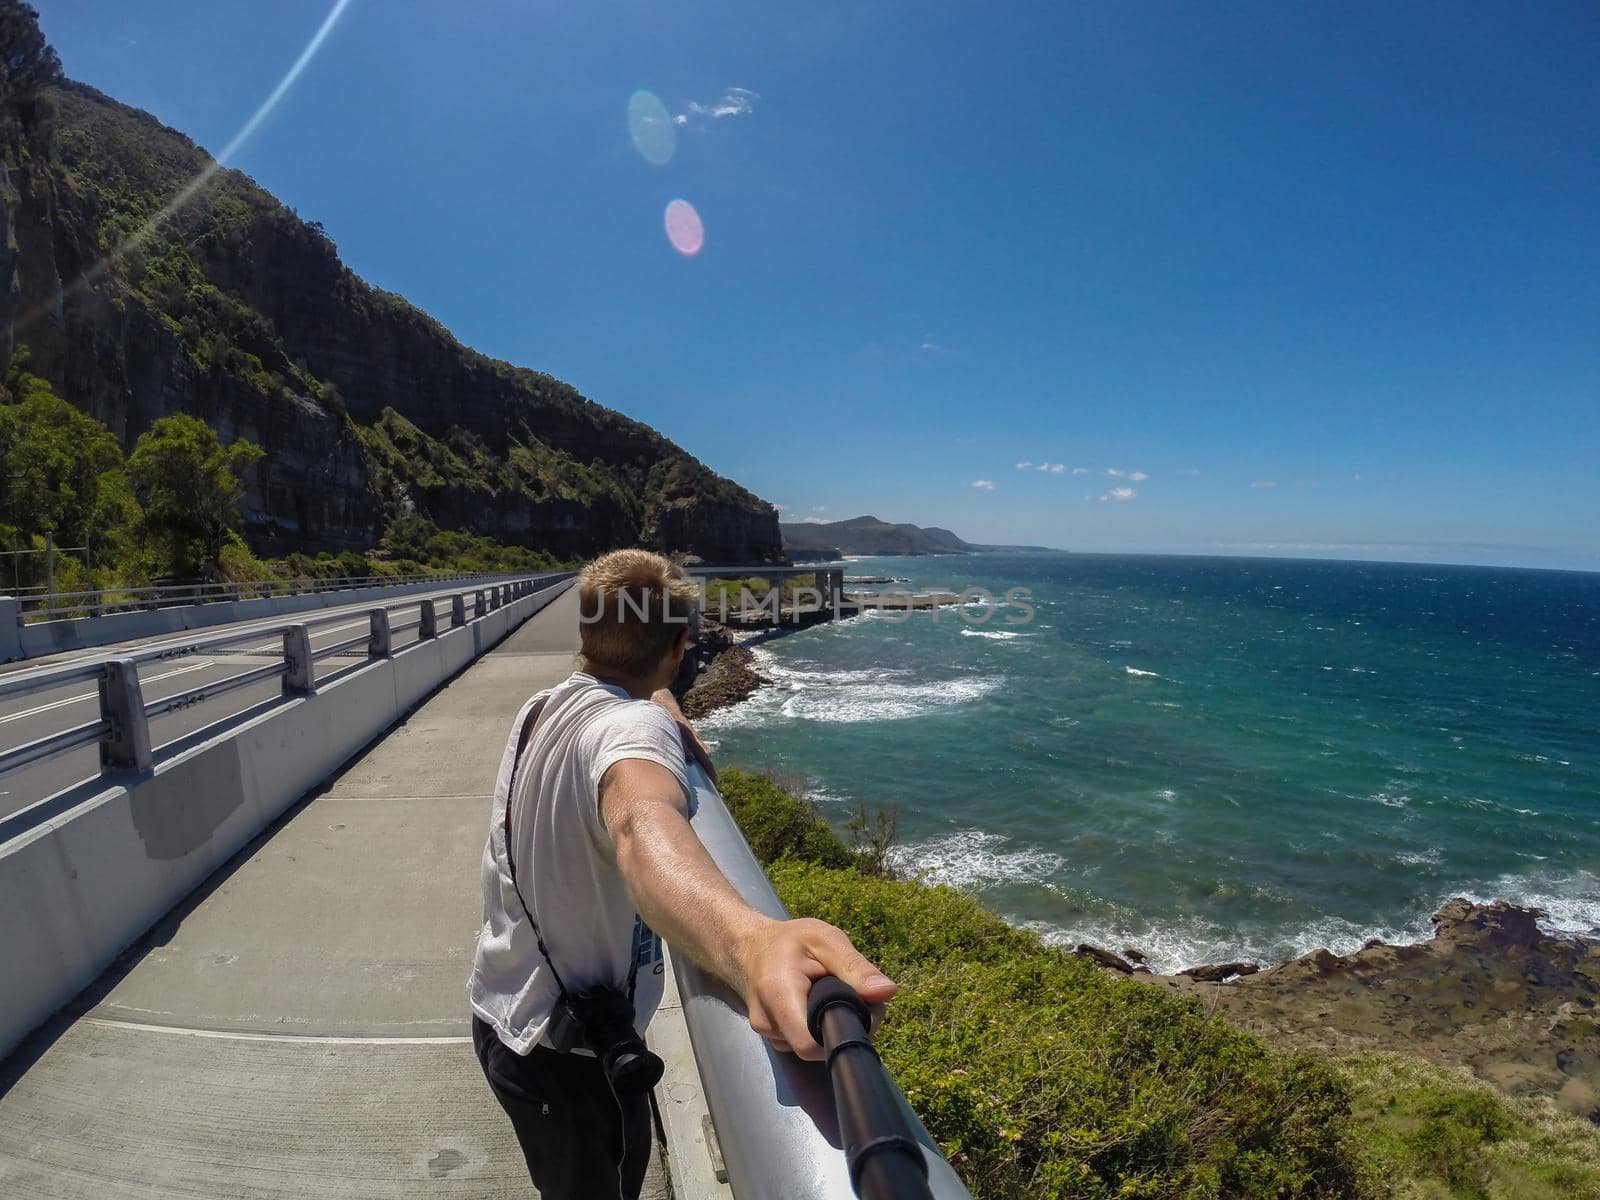 yung man making selfie at the Sea Cliff Bridge along the Grand Pacific Drive, Australia by bettercallcurry